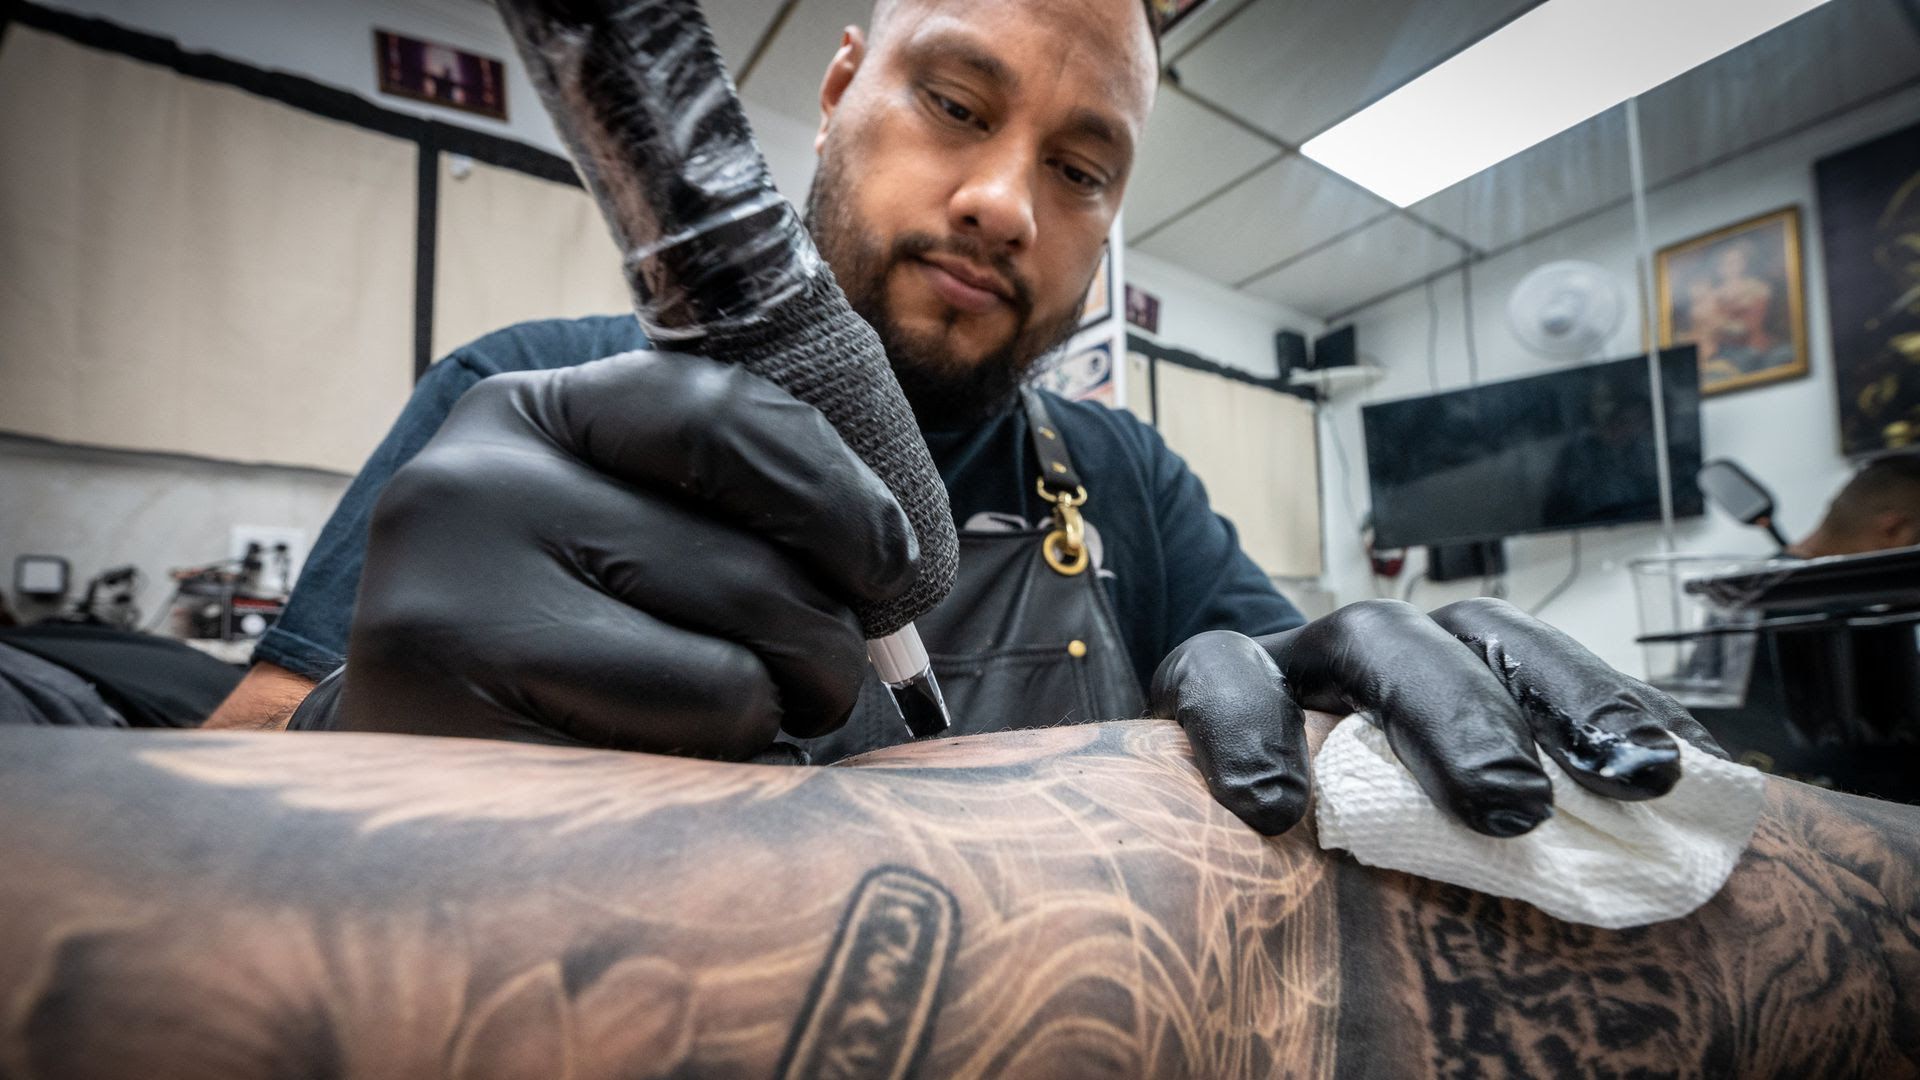 Tattoo artist Andy “Kedavra” Rodrigues in the studio he co-owns, Chupacabra Tattoo in New York. Photo: J. Conrad Williams, Jr./Newsday RM via Getty Images